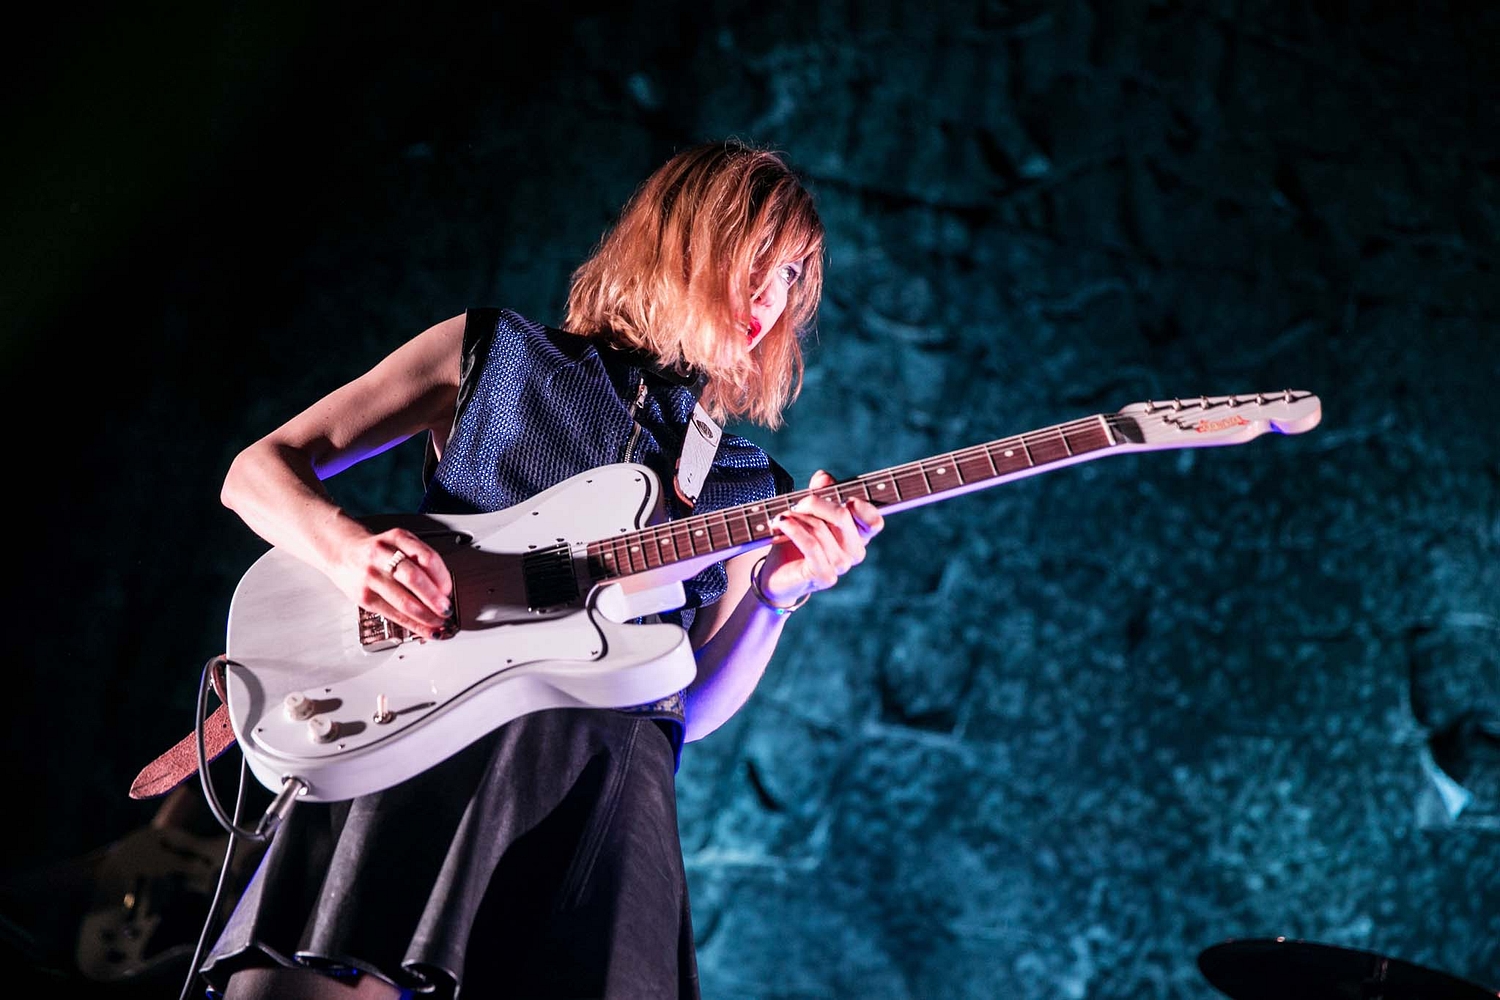 Watch Sleater-Kinney and The National cover Creedence Clearwater Revival